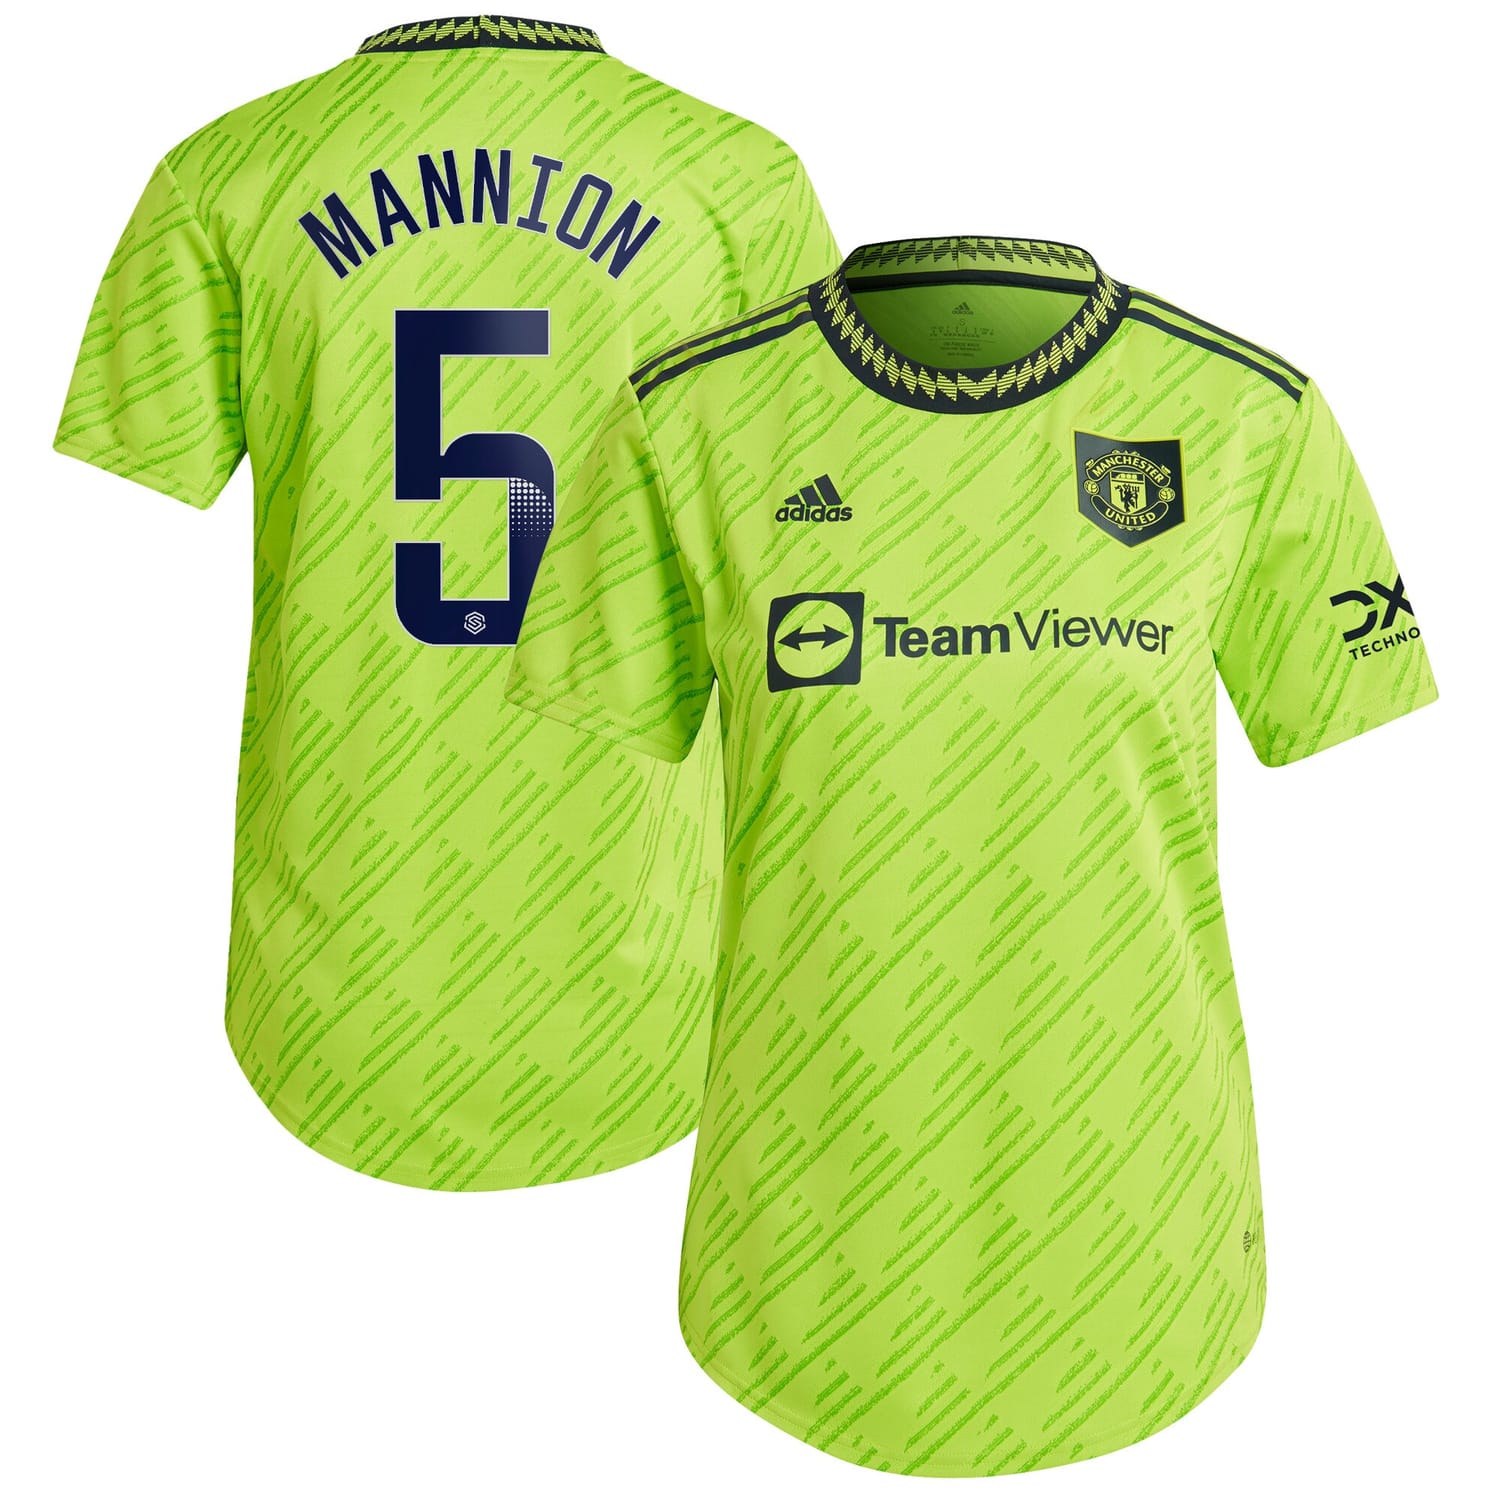 Premier League Manchester United Third WSL Authentic Jersey Shirt 2022-23 player Aoife Mannion 5 printing for Women